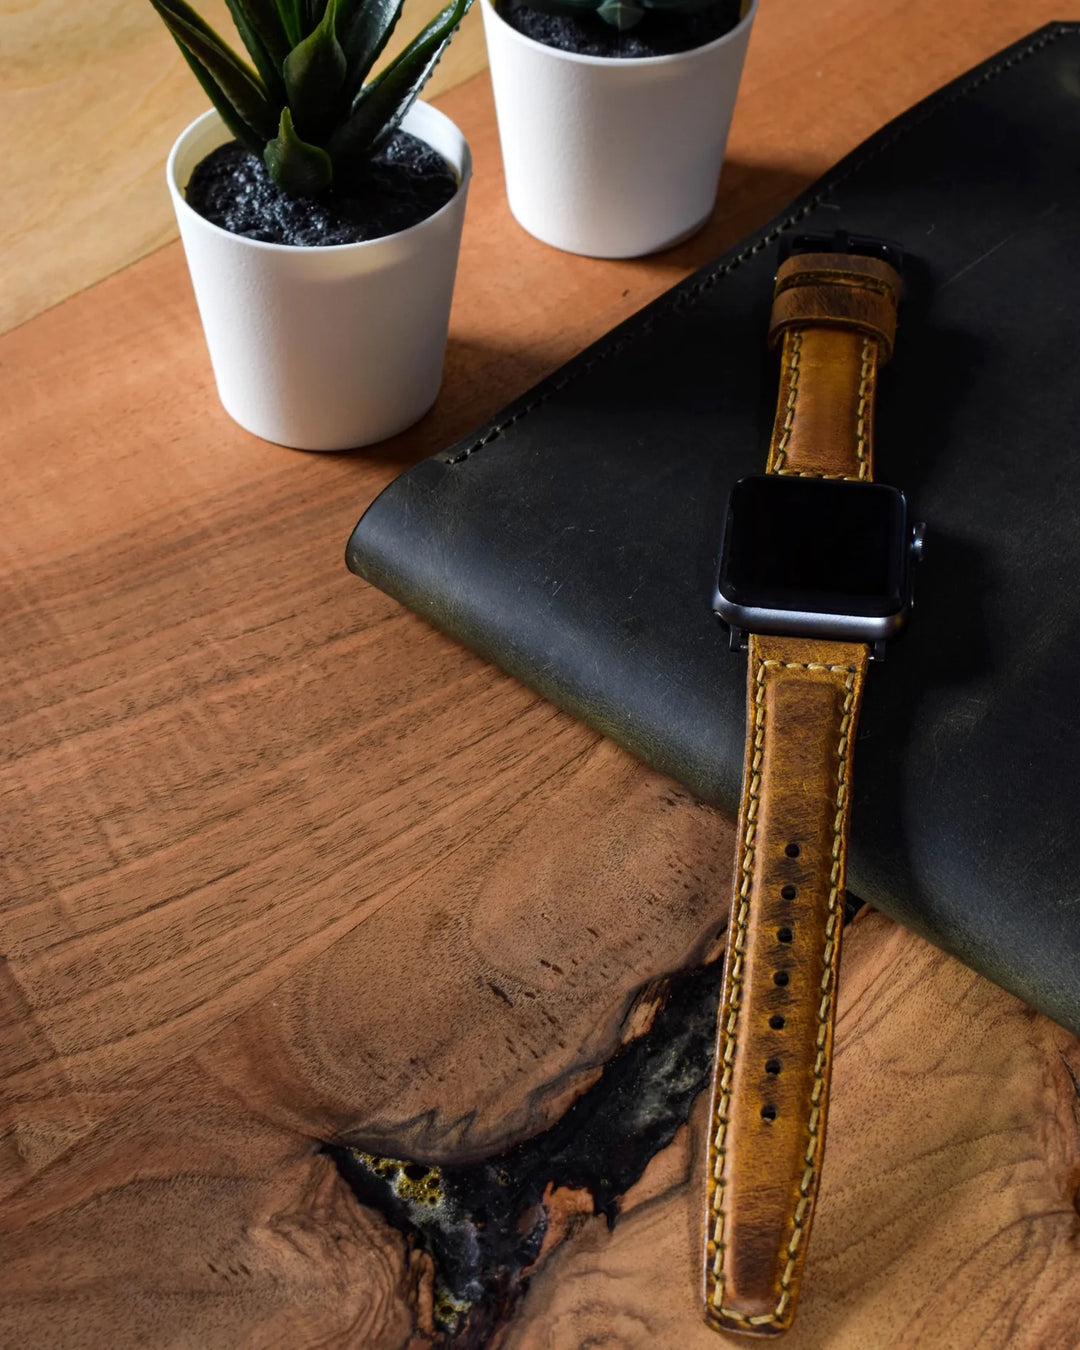 Apple Watch Ultra 2 49 MM Handmade Leather Band Strap Camel